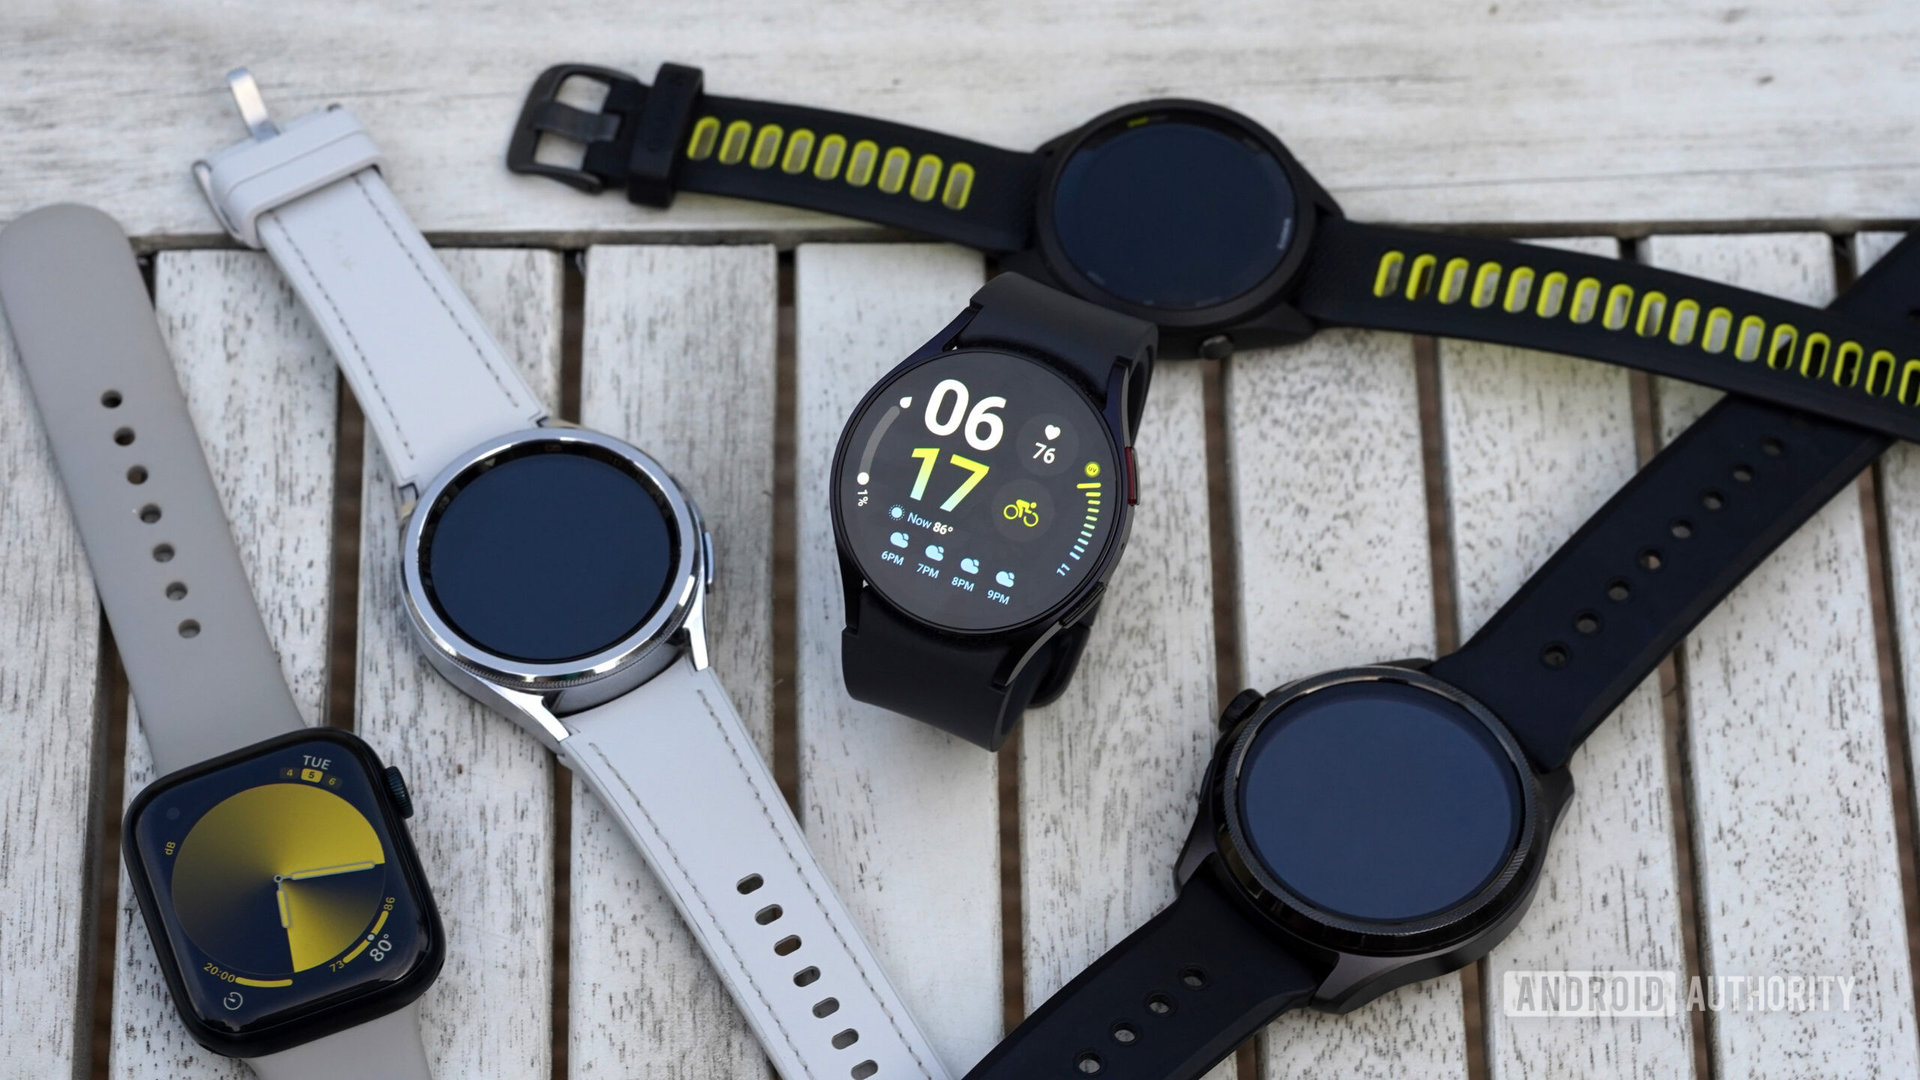 A variety of leading wearables from Samsung, Apple, Garmin, and Mobvoi rest on a wood surface.